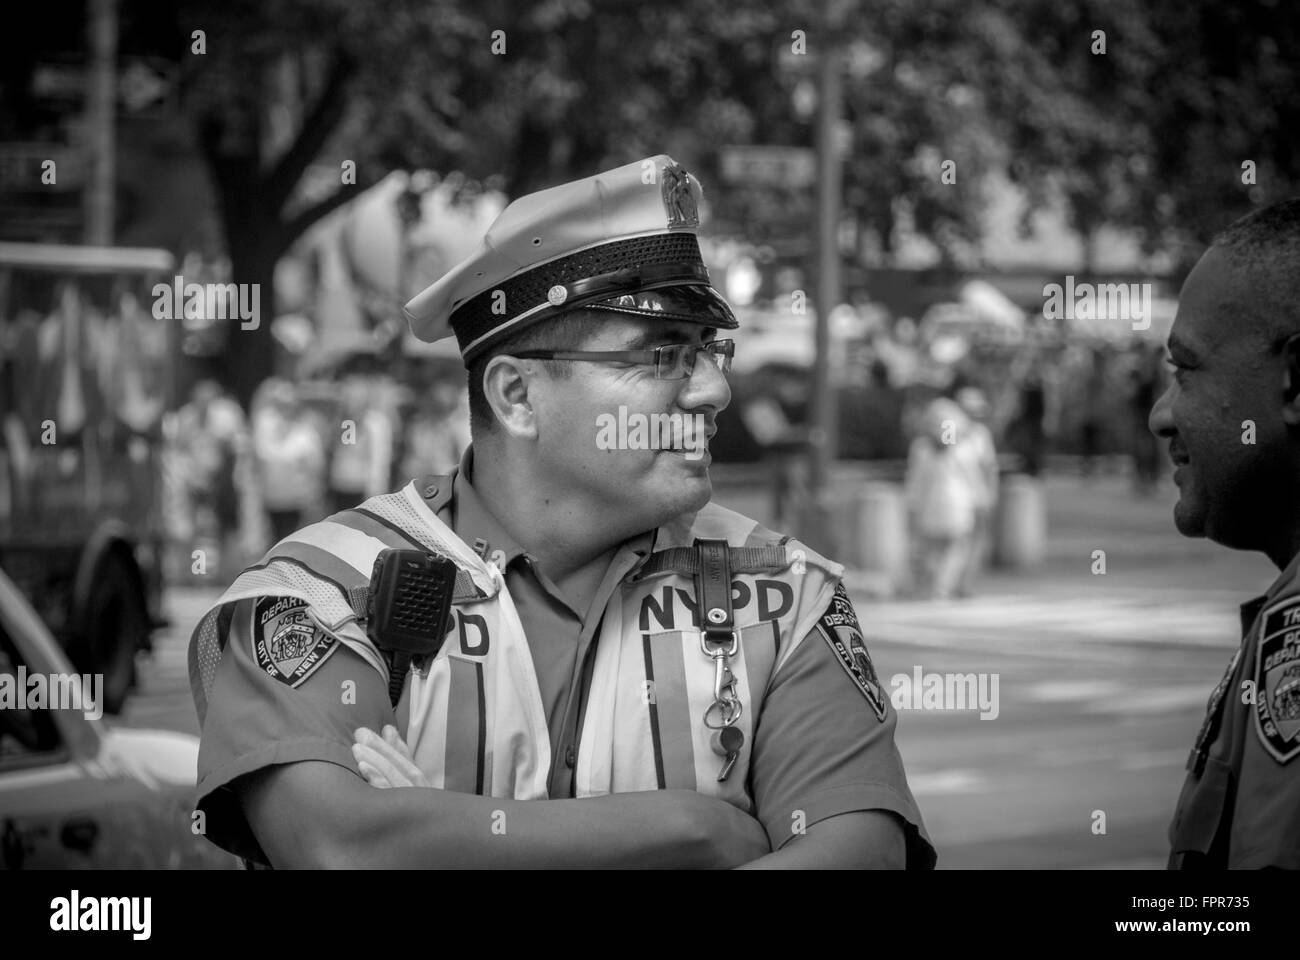 NYPD Traffic Officer chatting to colleague, New York City, USA. Stock Photo